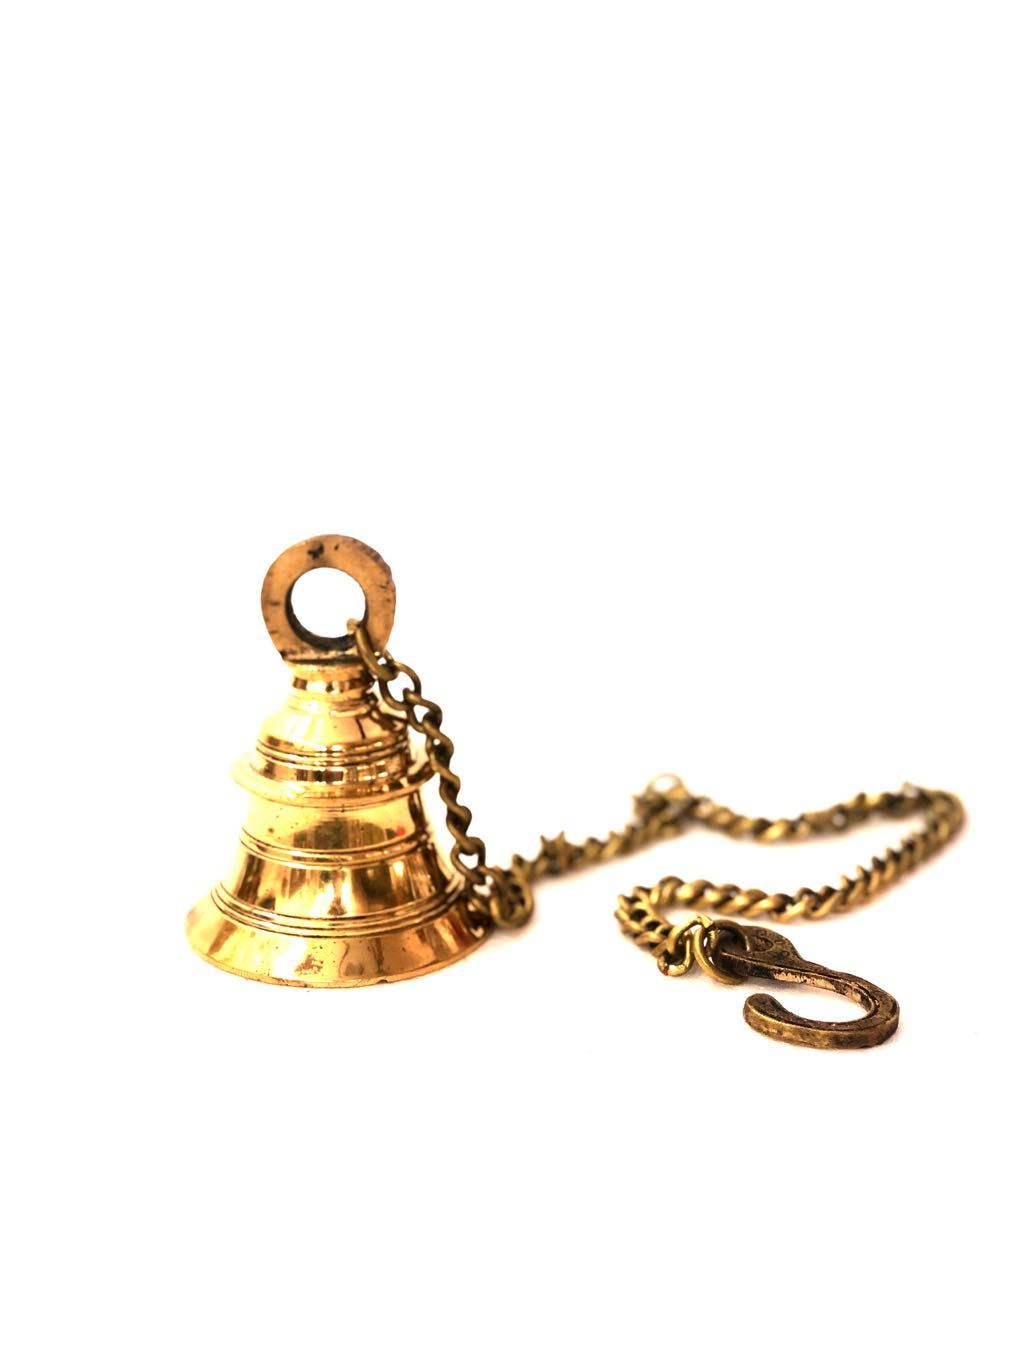 Hanging Brass Bells With Chain Exquisite Handcrafted Indian Art From Tamrapatra